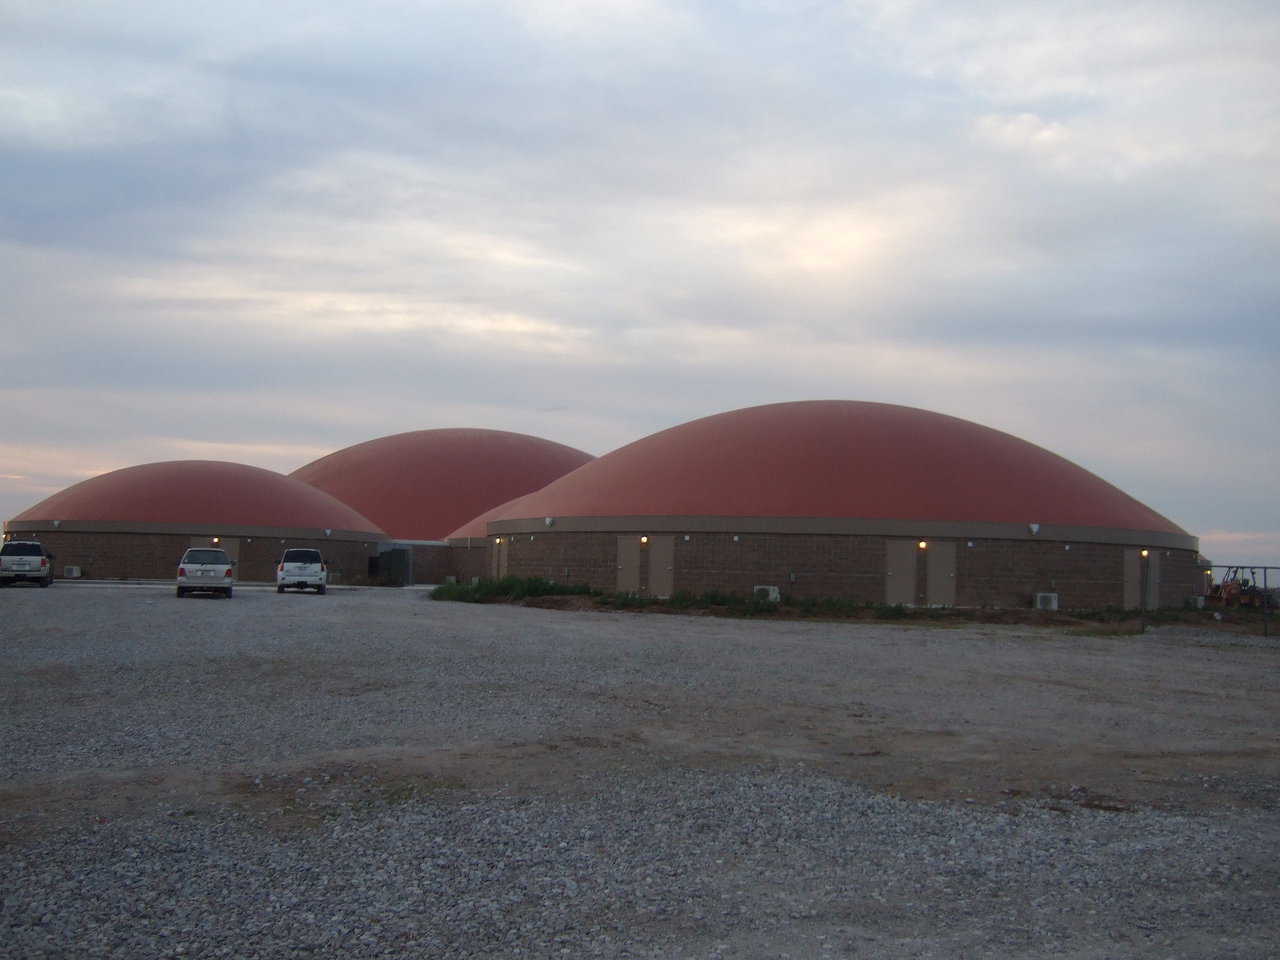 Geronimo, Oklahoma — A whopping 73% of Geronimo’s voters passed a $5.7 million bond, $4 million of which was slated for the construction of five Monolithic Domes.